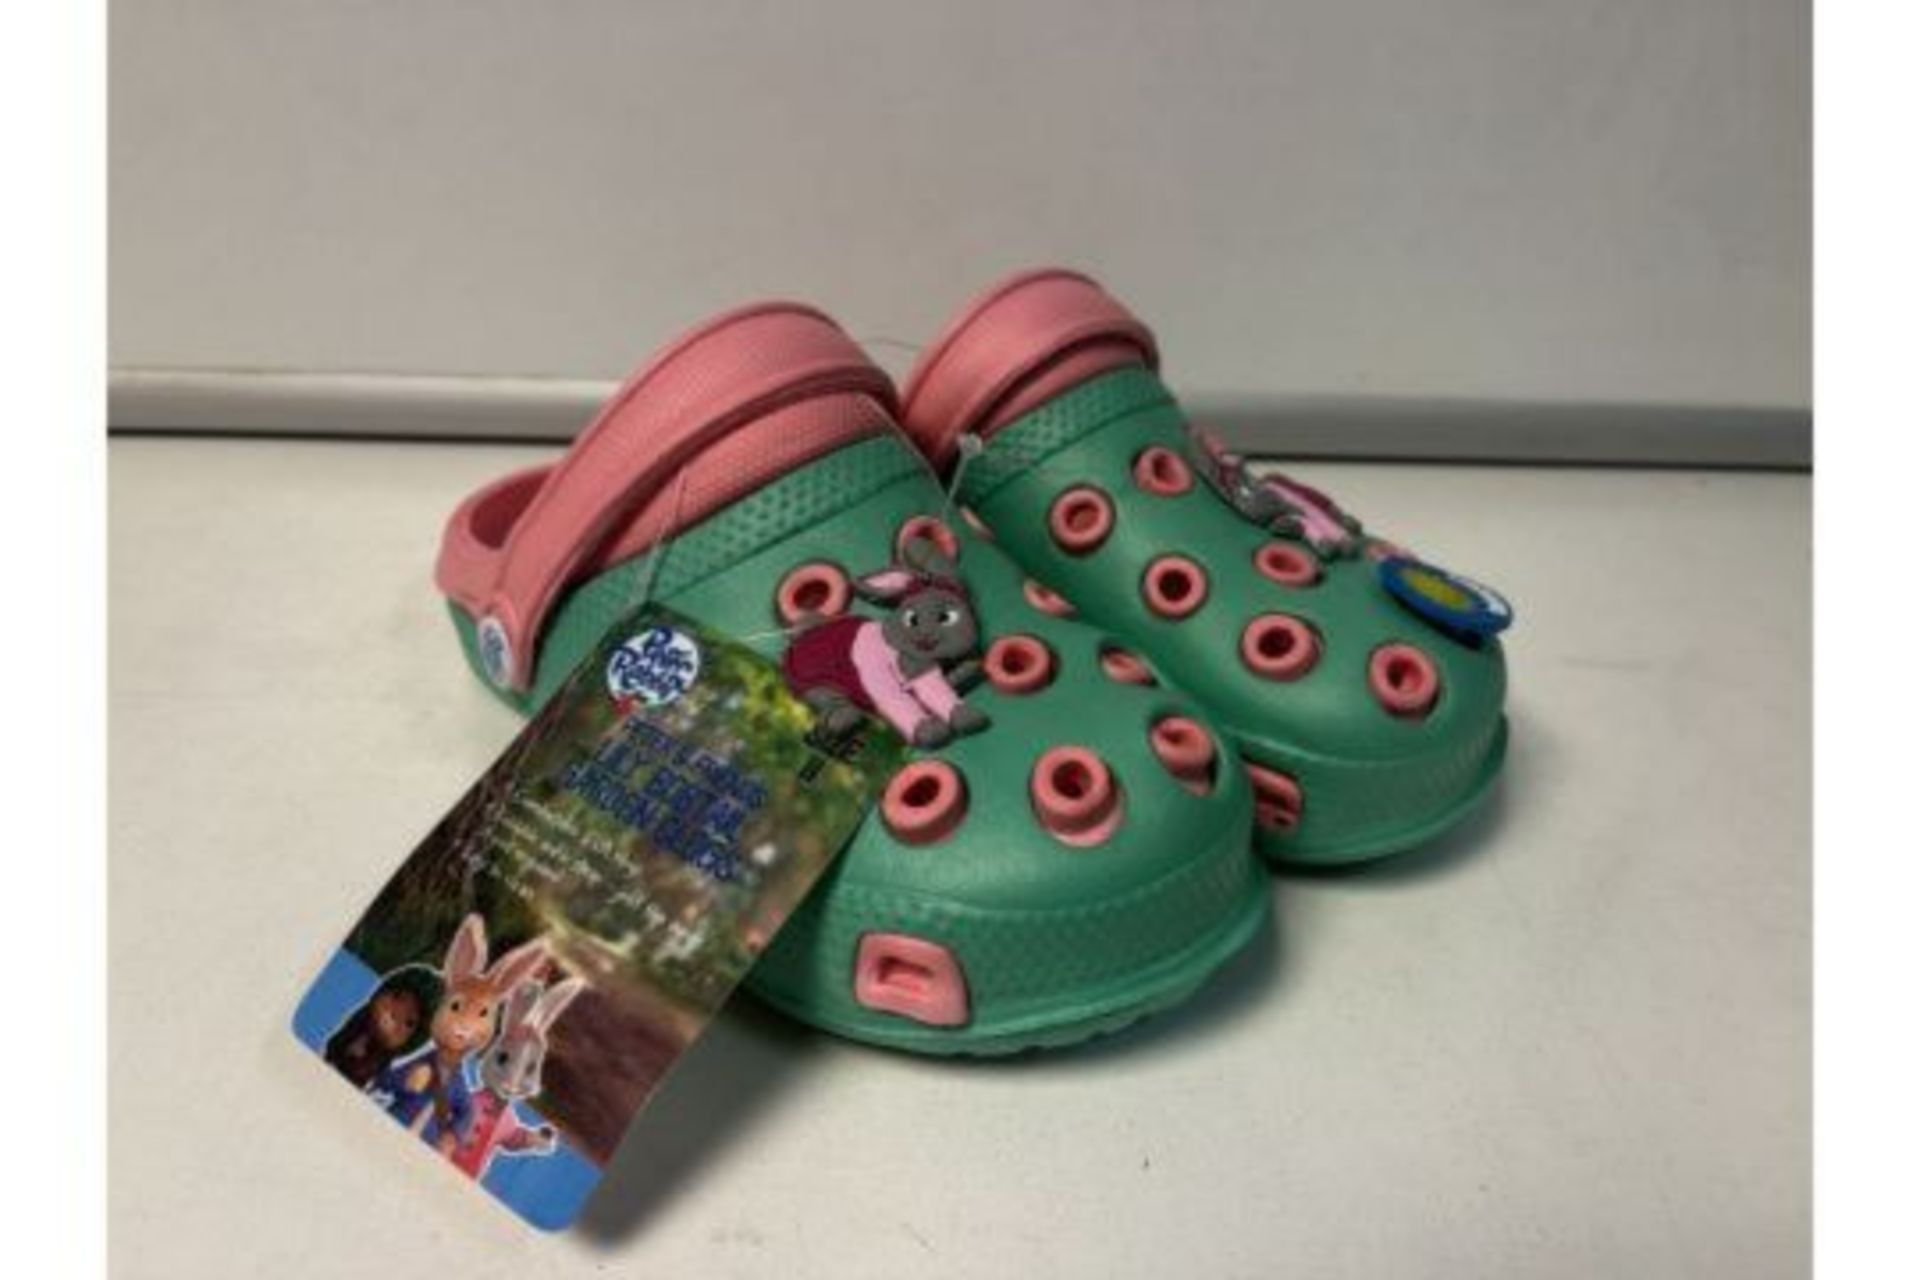 18 X NEW PAIRS OF PETER RABBIT & FRIENDS LILY BOBTAIL GARDEN CLOG CHILDRENS SHOES. SIZES MAY VARY.